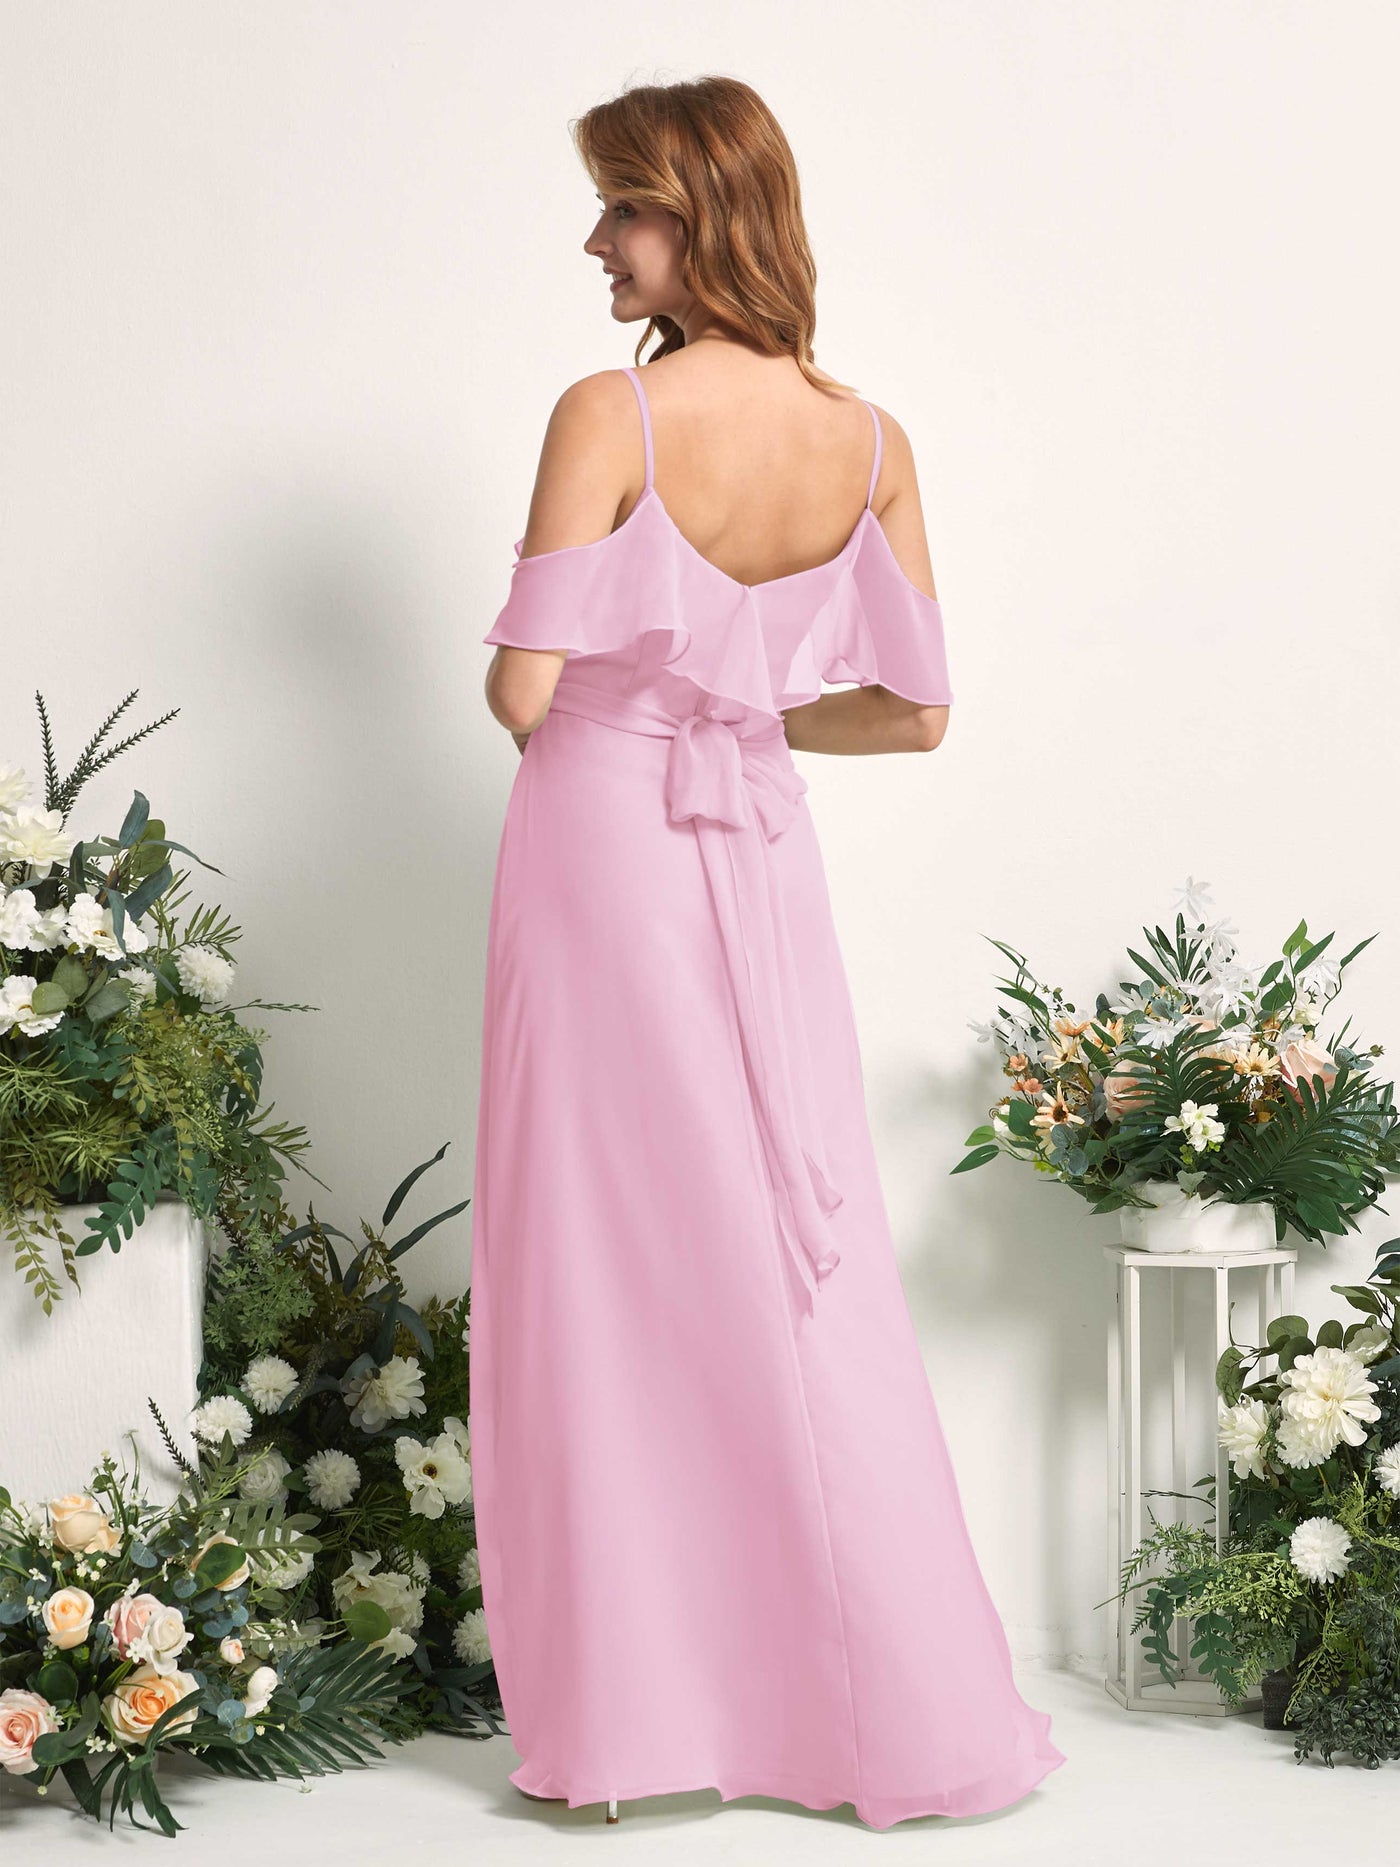 Bridesmaid Dress A-line Chiffon Spaghetti-straps Full Length Sleeveless Wedding Party Dress - Candy Pink (81227439)#color_candy-pink